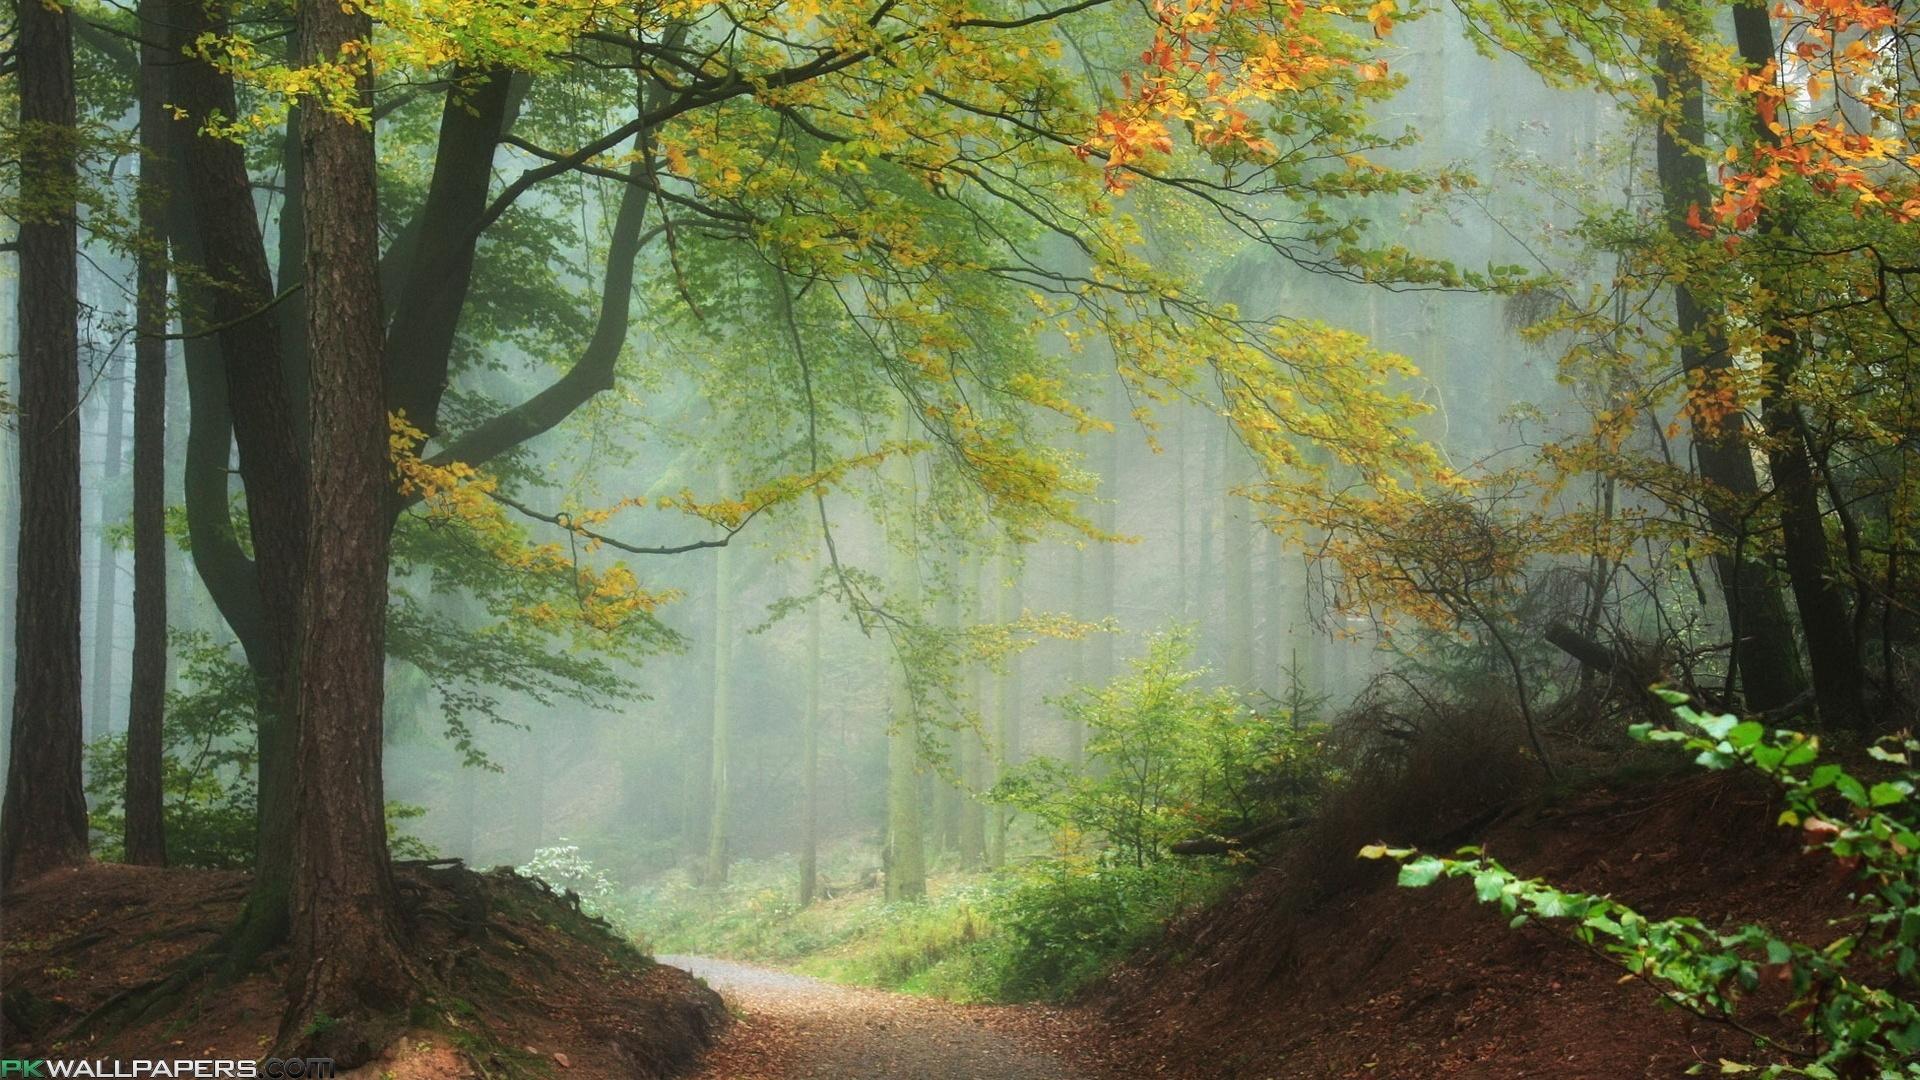 Download 1920x1080 Misty Forest Path wallpaper